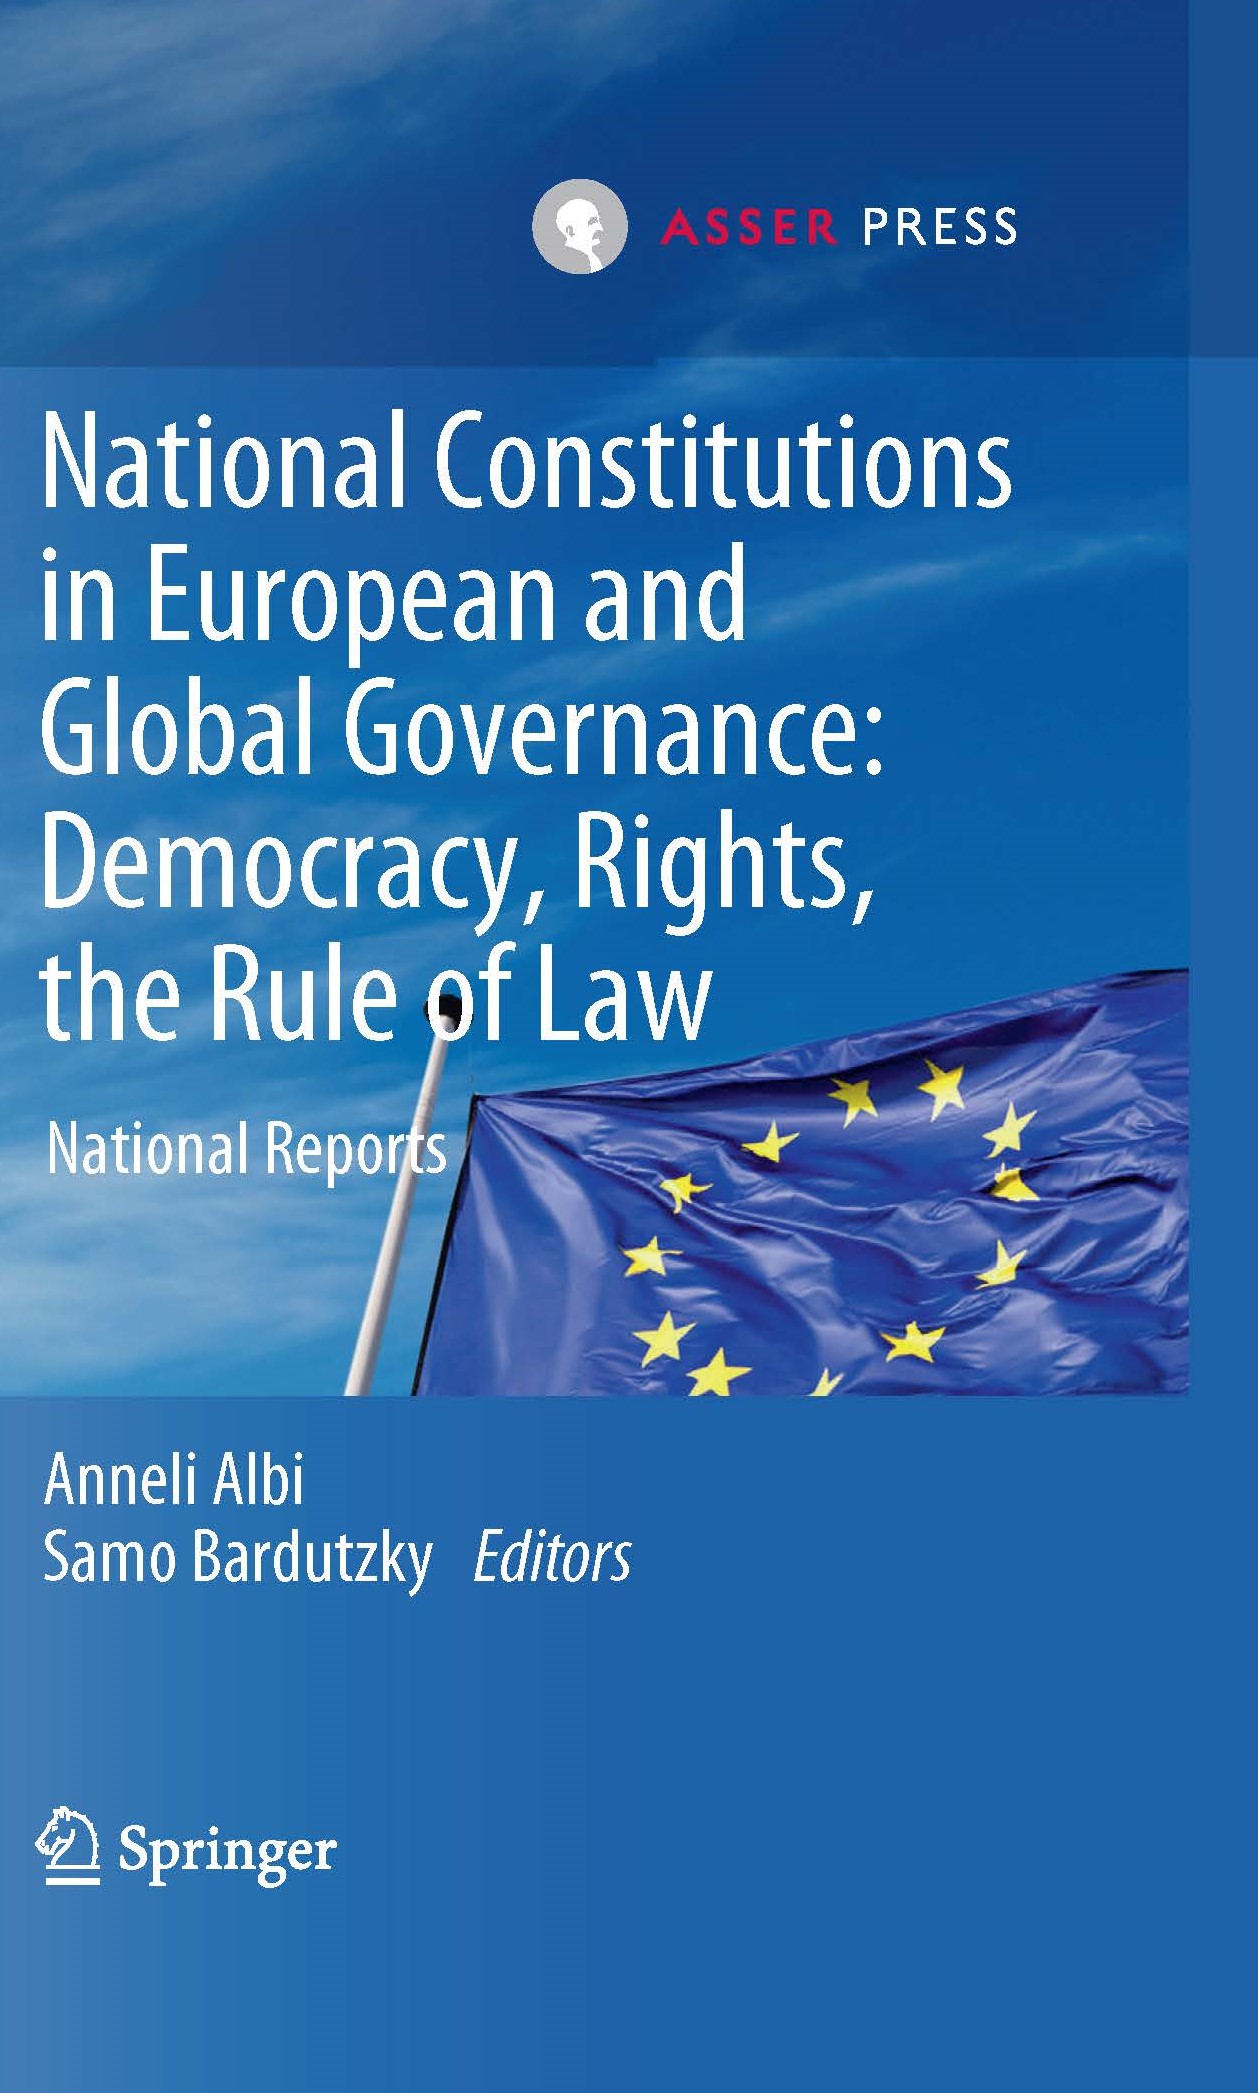 National Constitutions in European and Global Governance: Democracy, Rights, the Rule of Law - National Reports